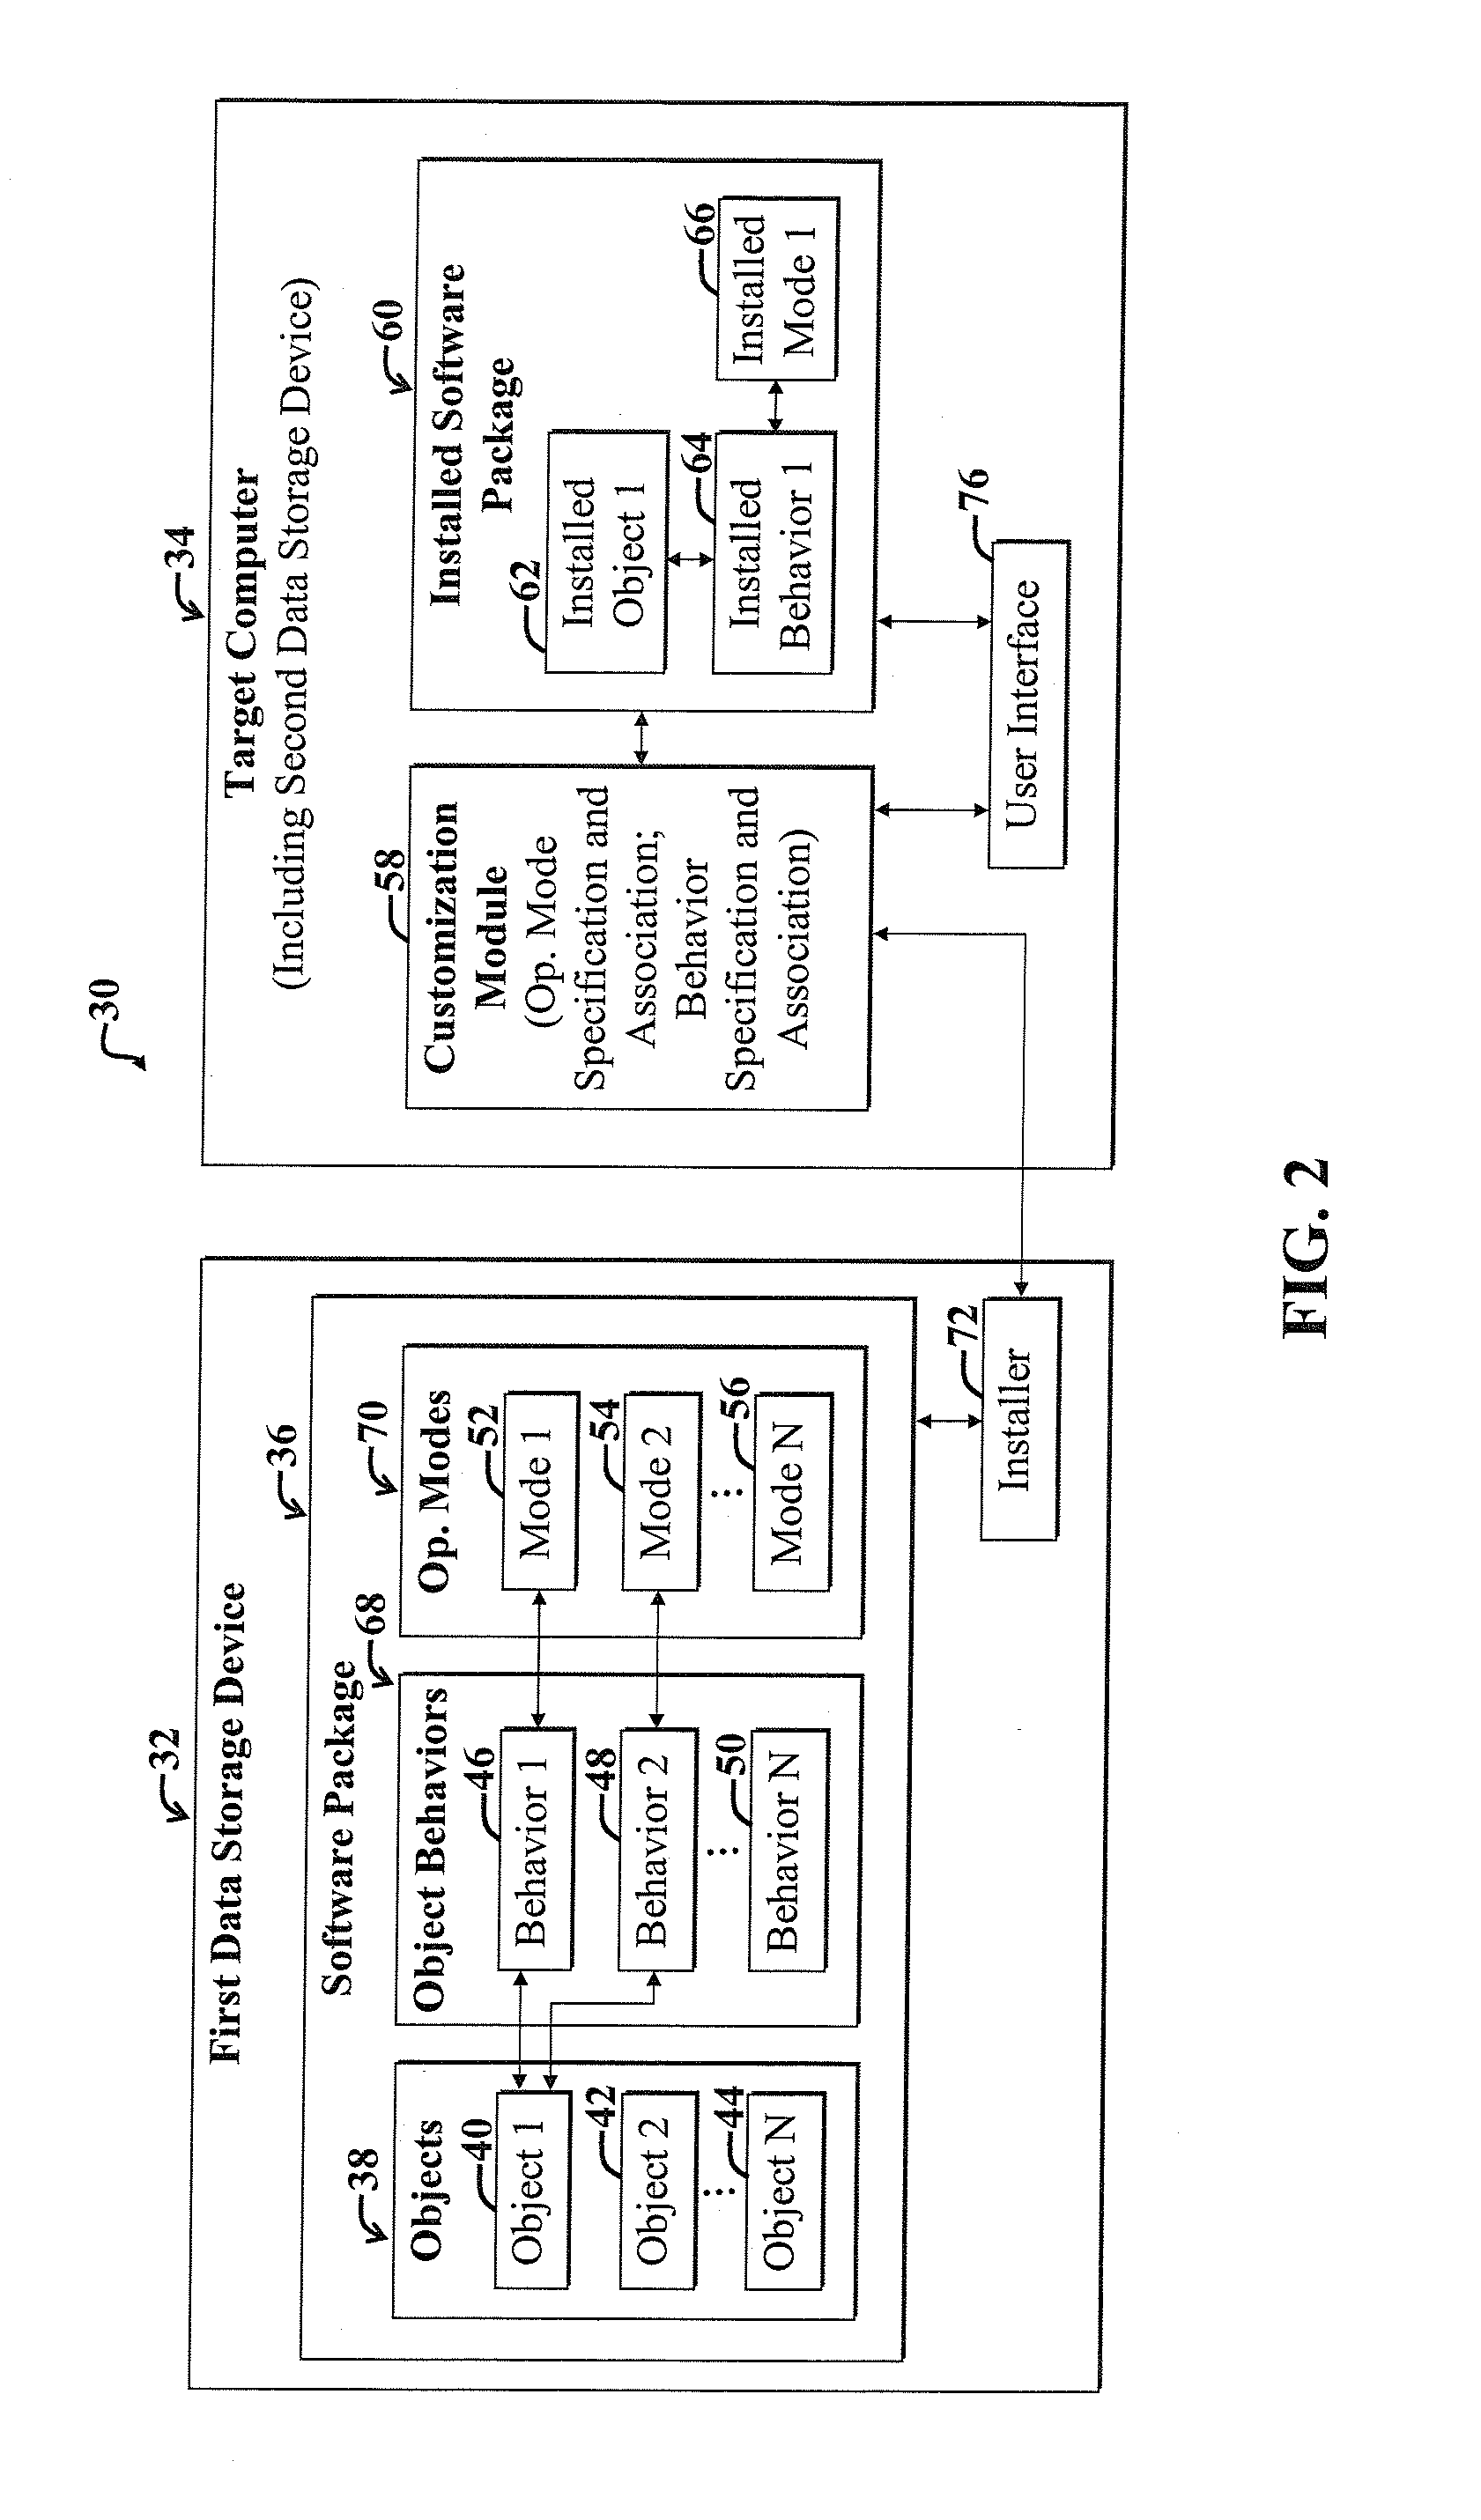 Association of object elements to operational modes